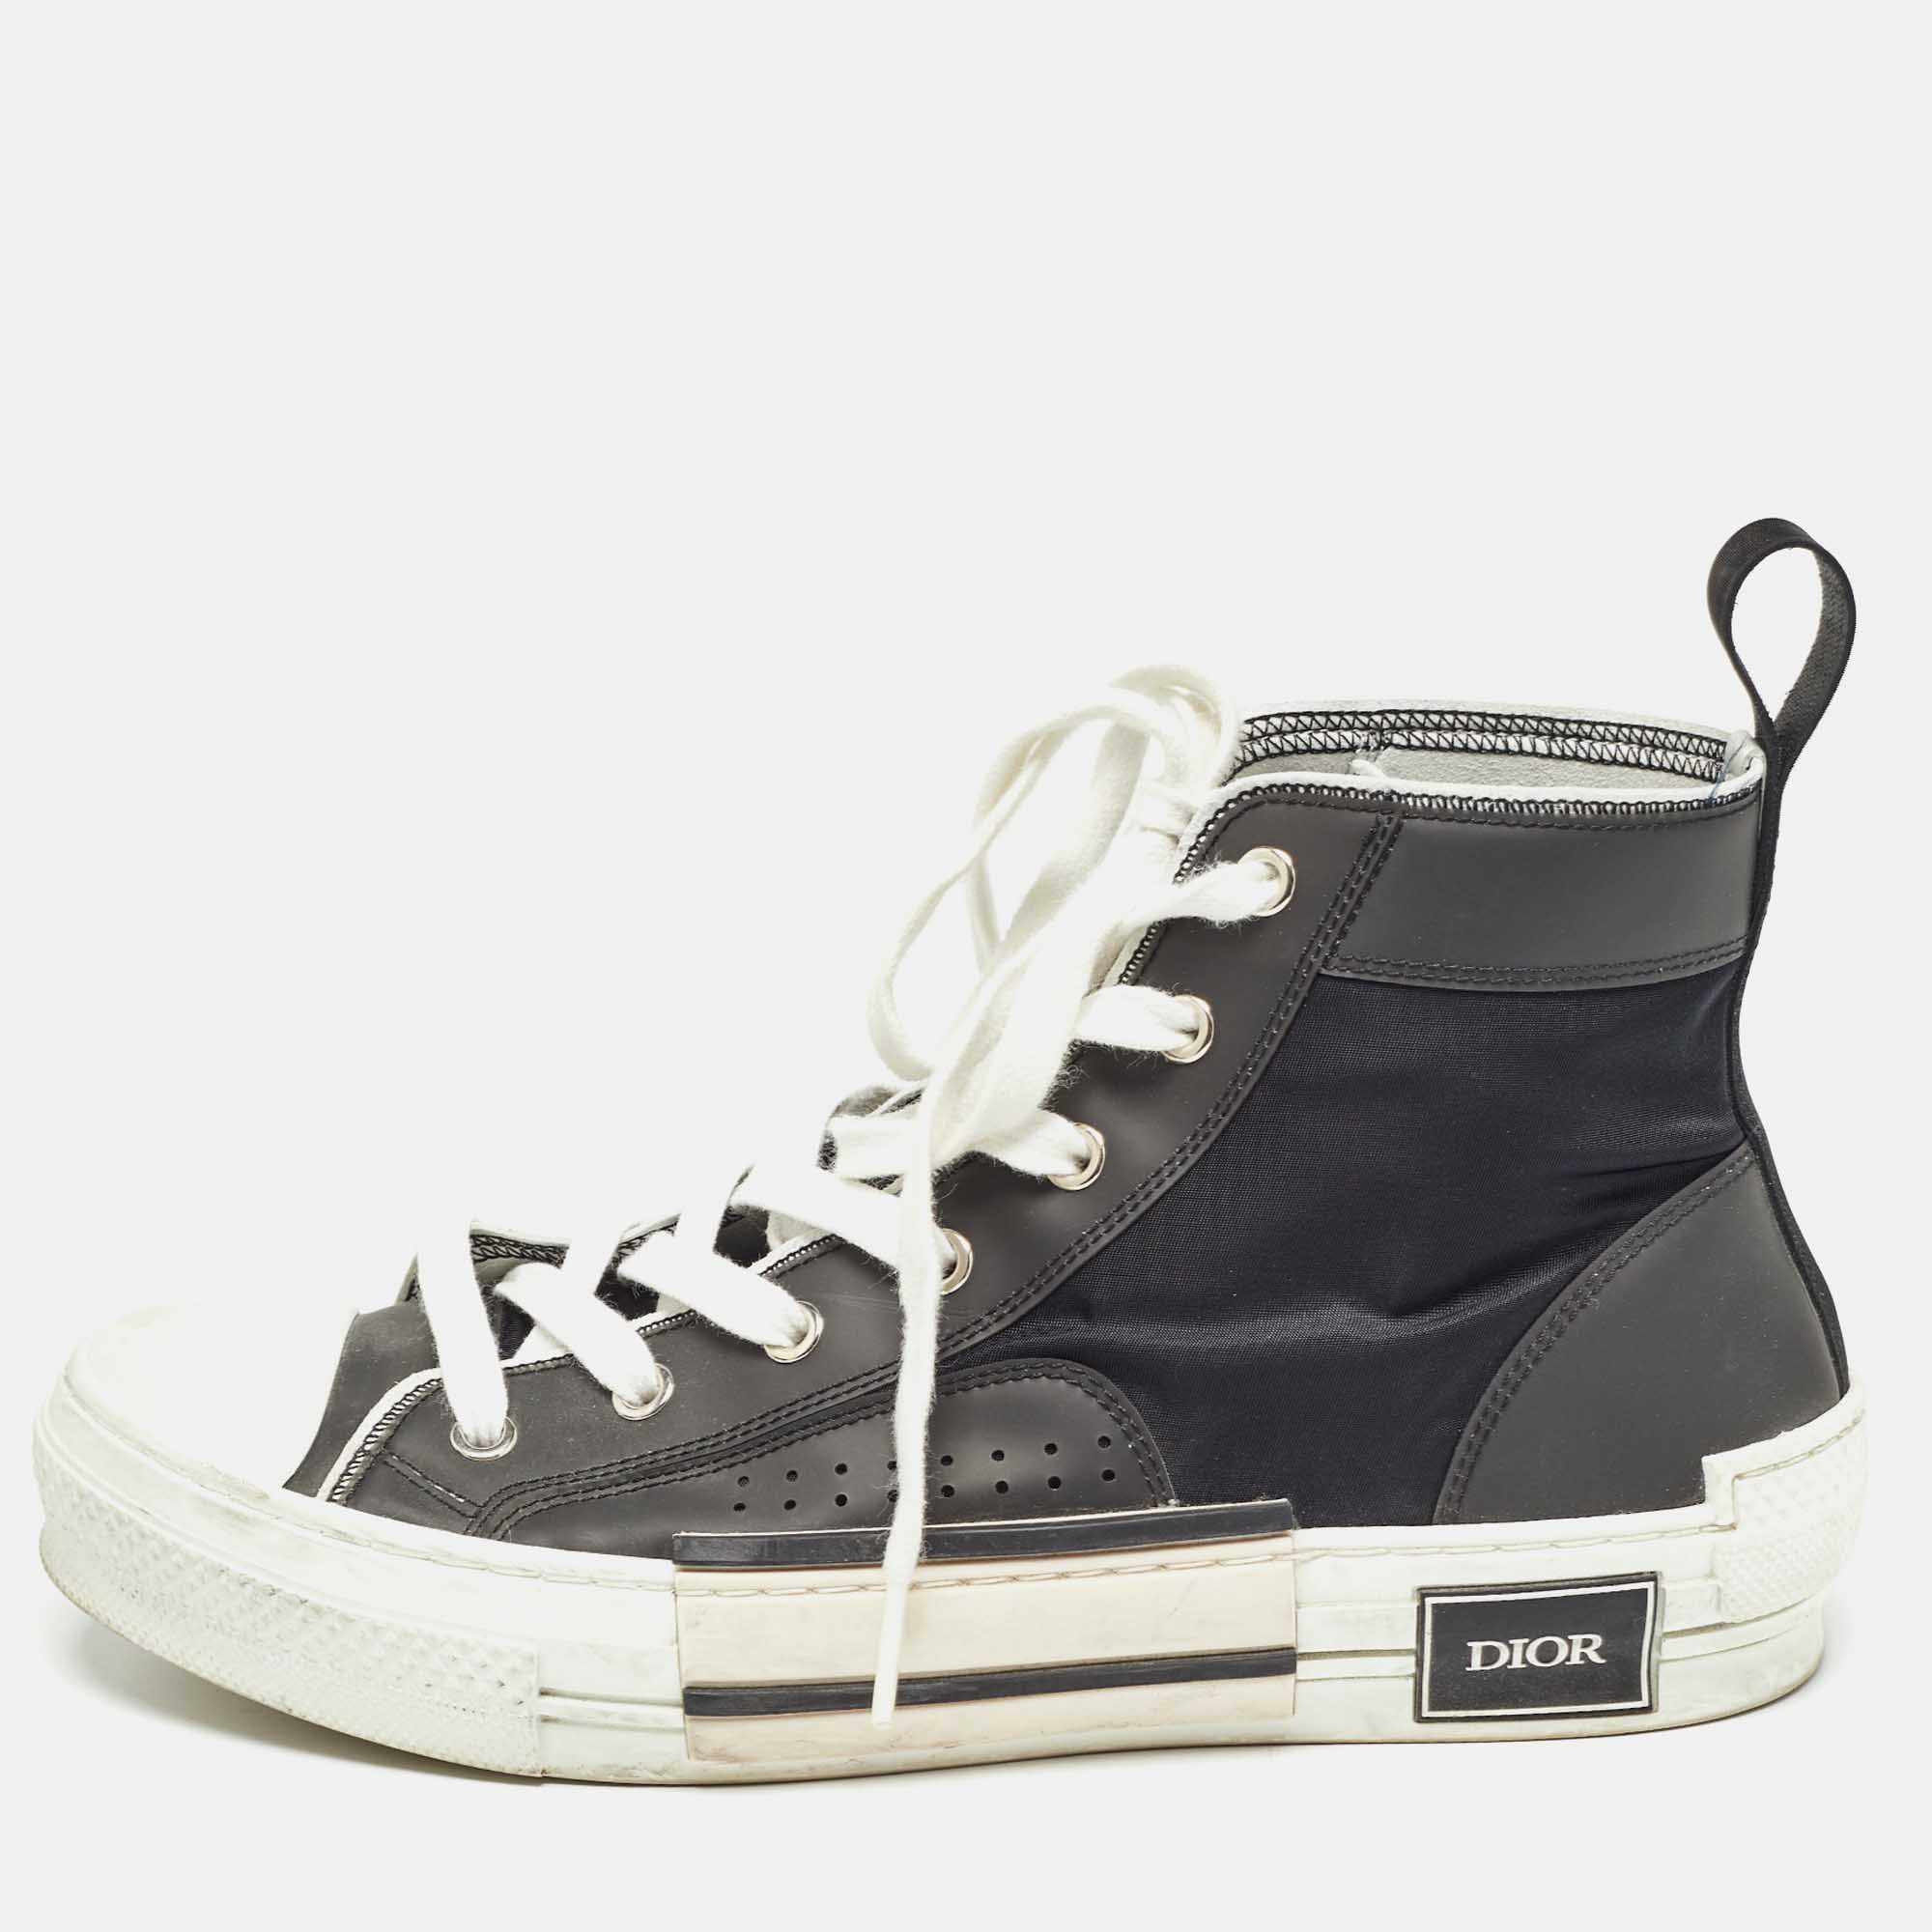 

Dior Black Nylon and Leather B23 High Top Sneakers Size